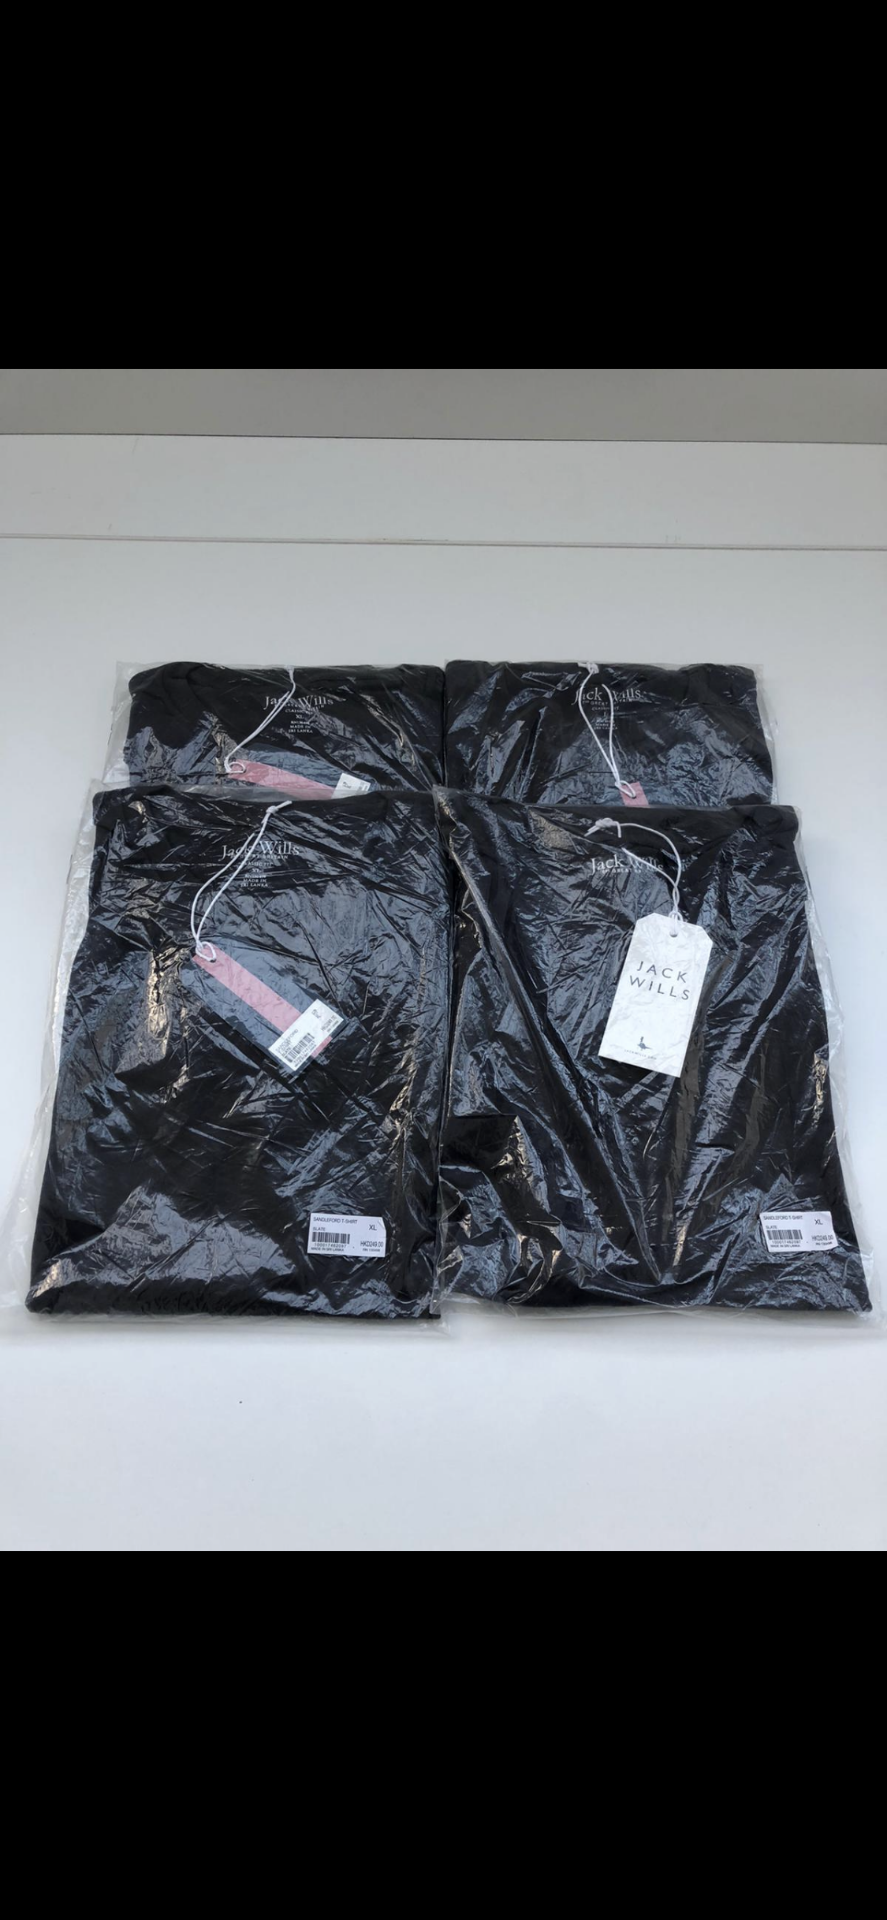 4 X JACK WILLS BLACK T SHIRTS IN VARIOUS SIZES RRP £100 036